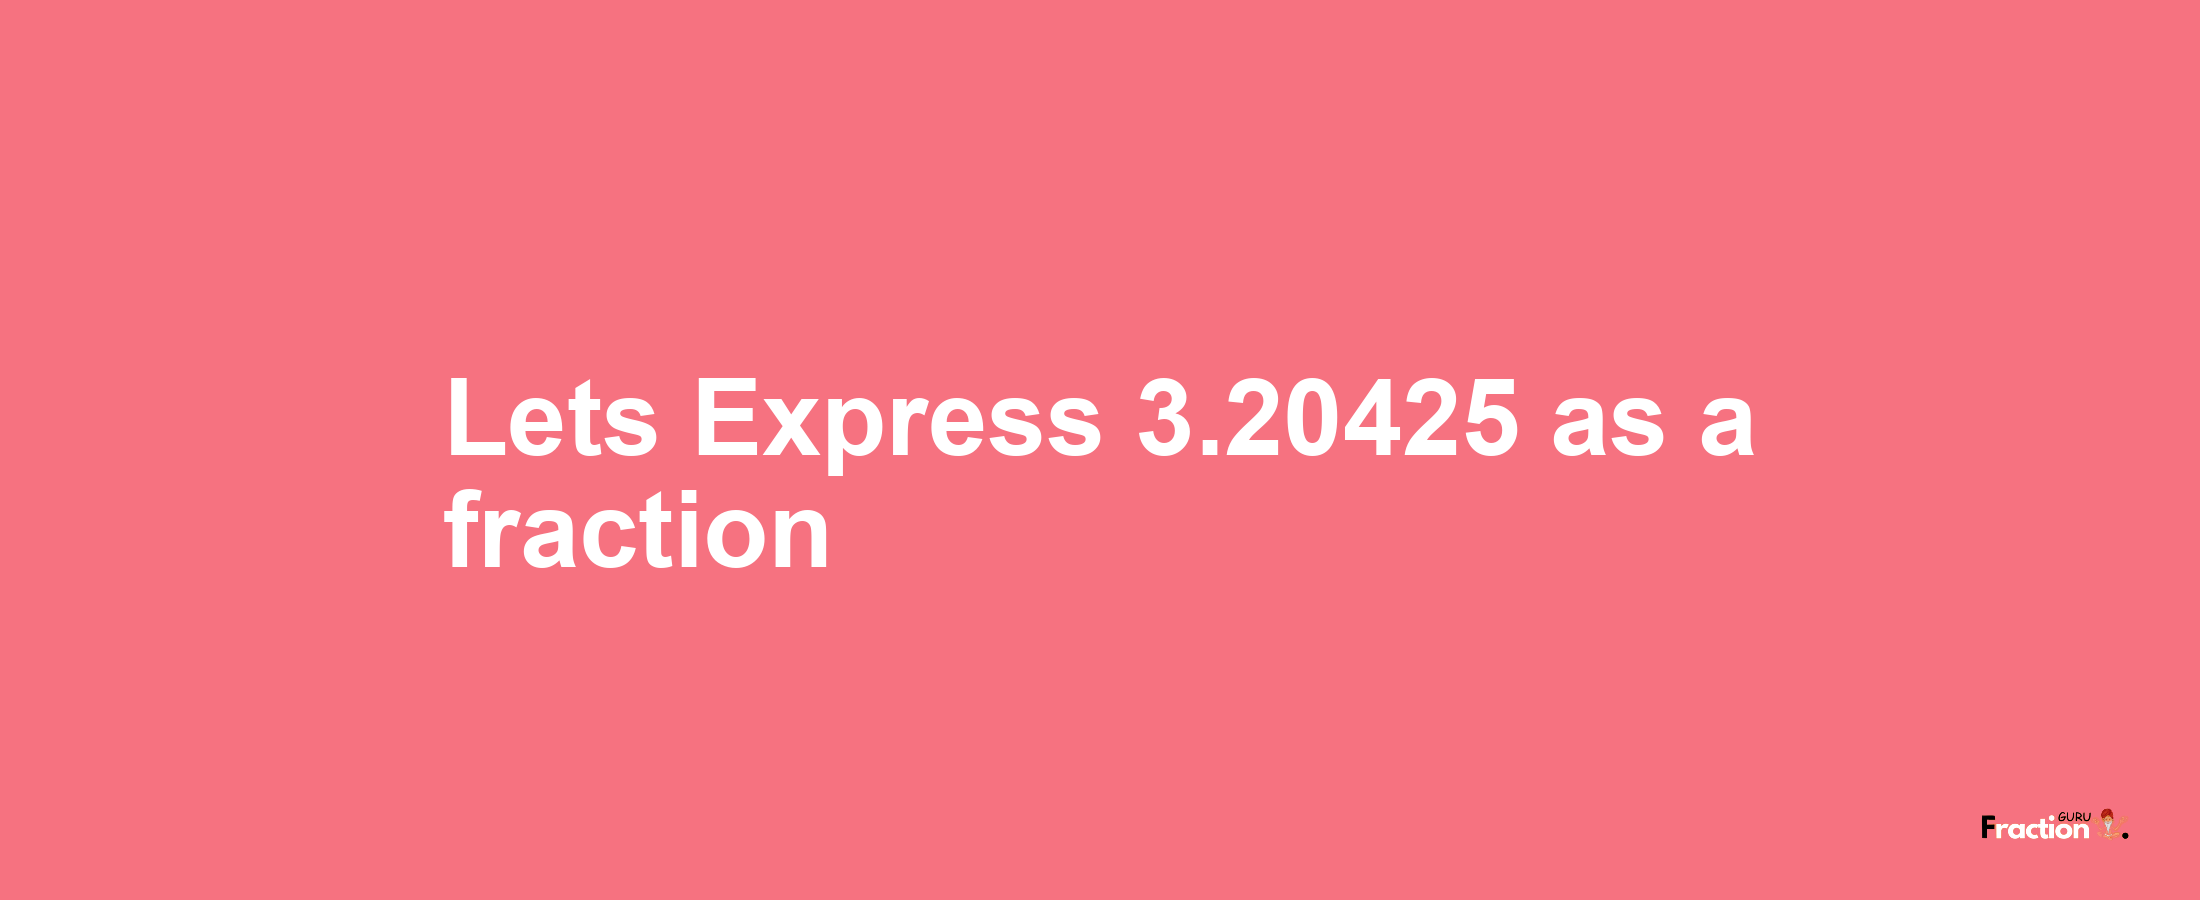 Lets Express 3.20425 as afraction